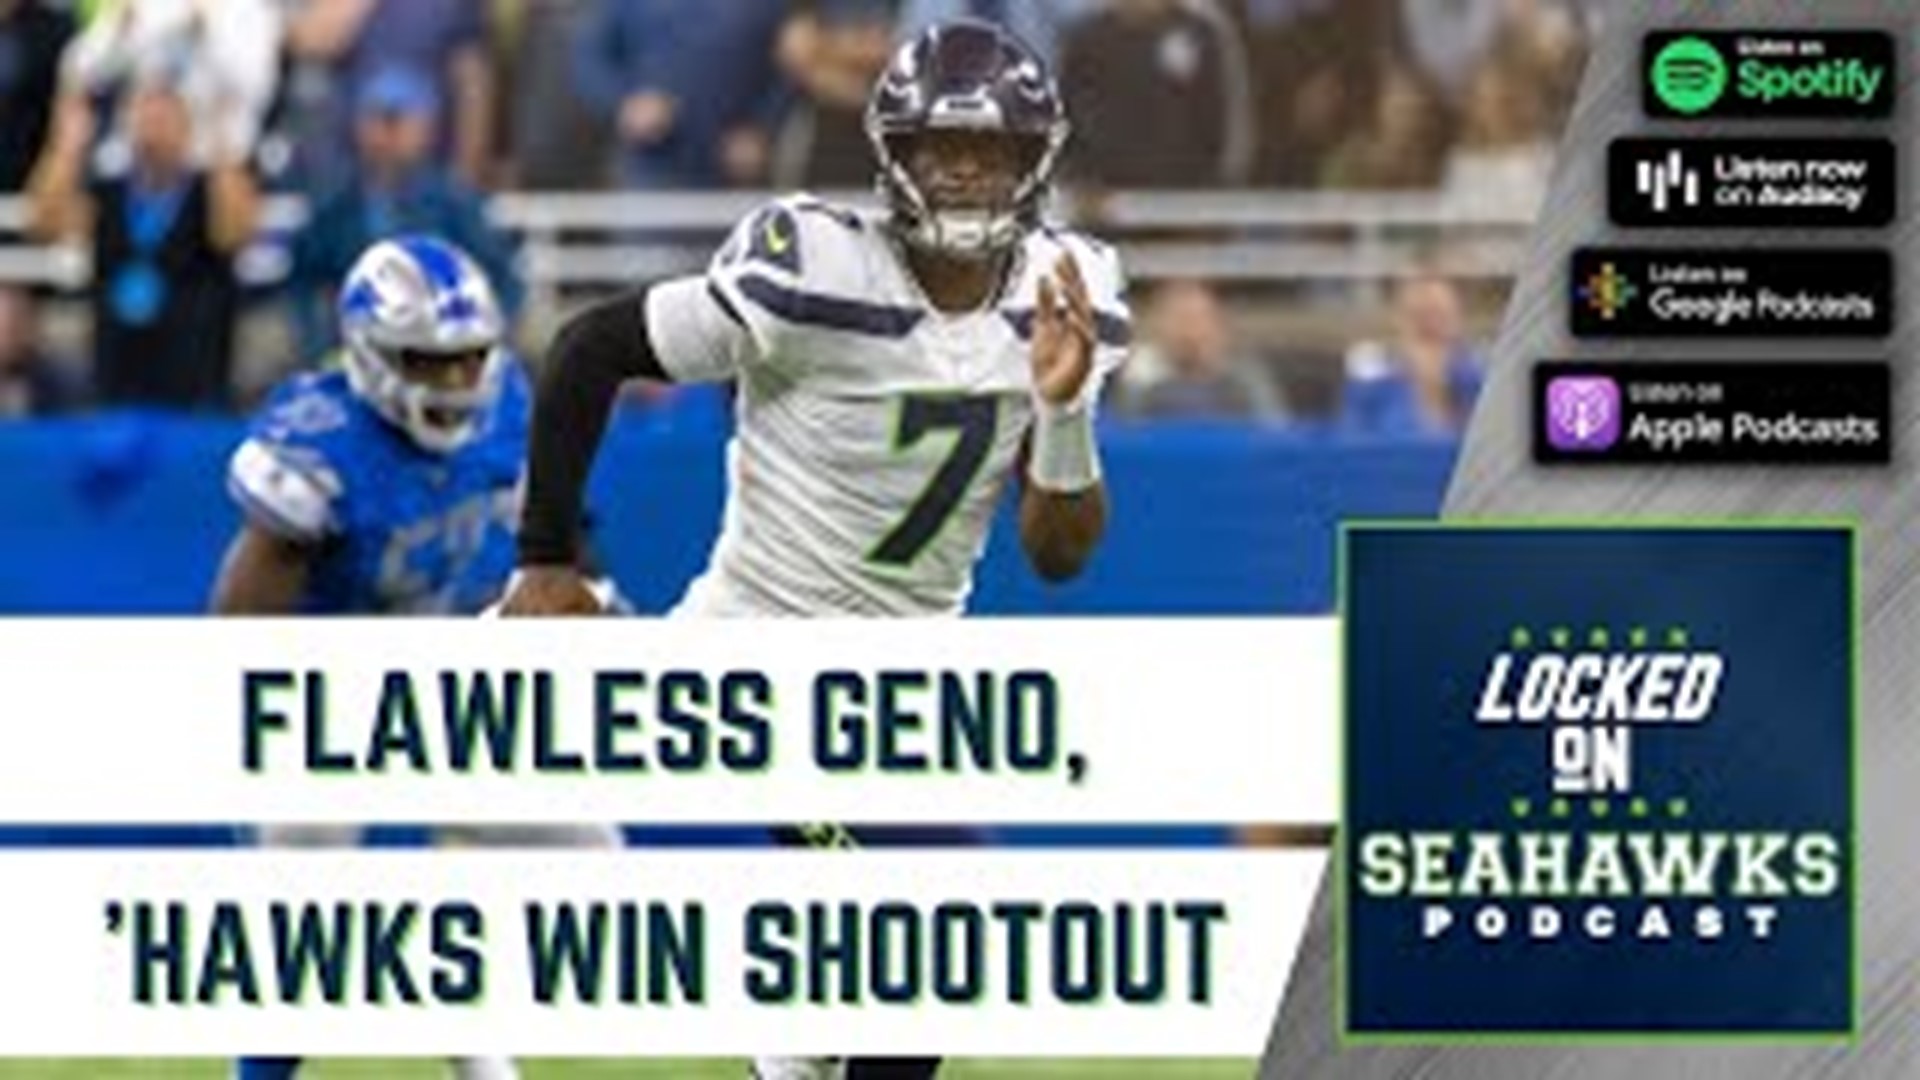 Paced by a strong performance by Geno Smith and Rashaad Penny, the Seattle Seahawks out-gunned Detroit Lions, the NFL's highest-scoring offense, for a 48-45 win.